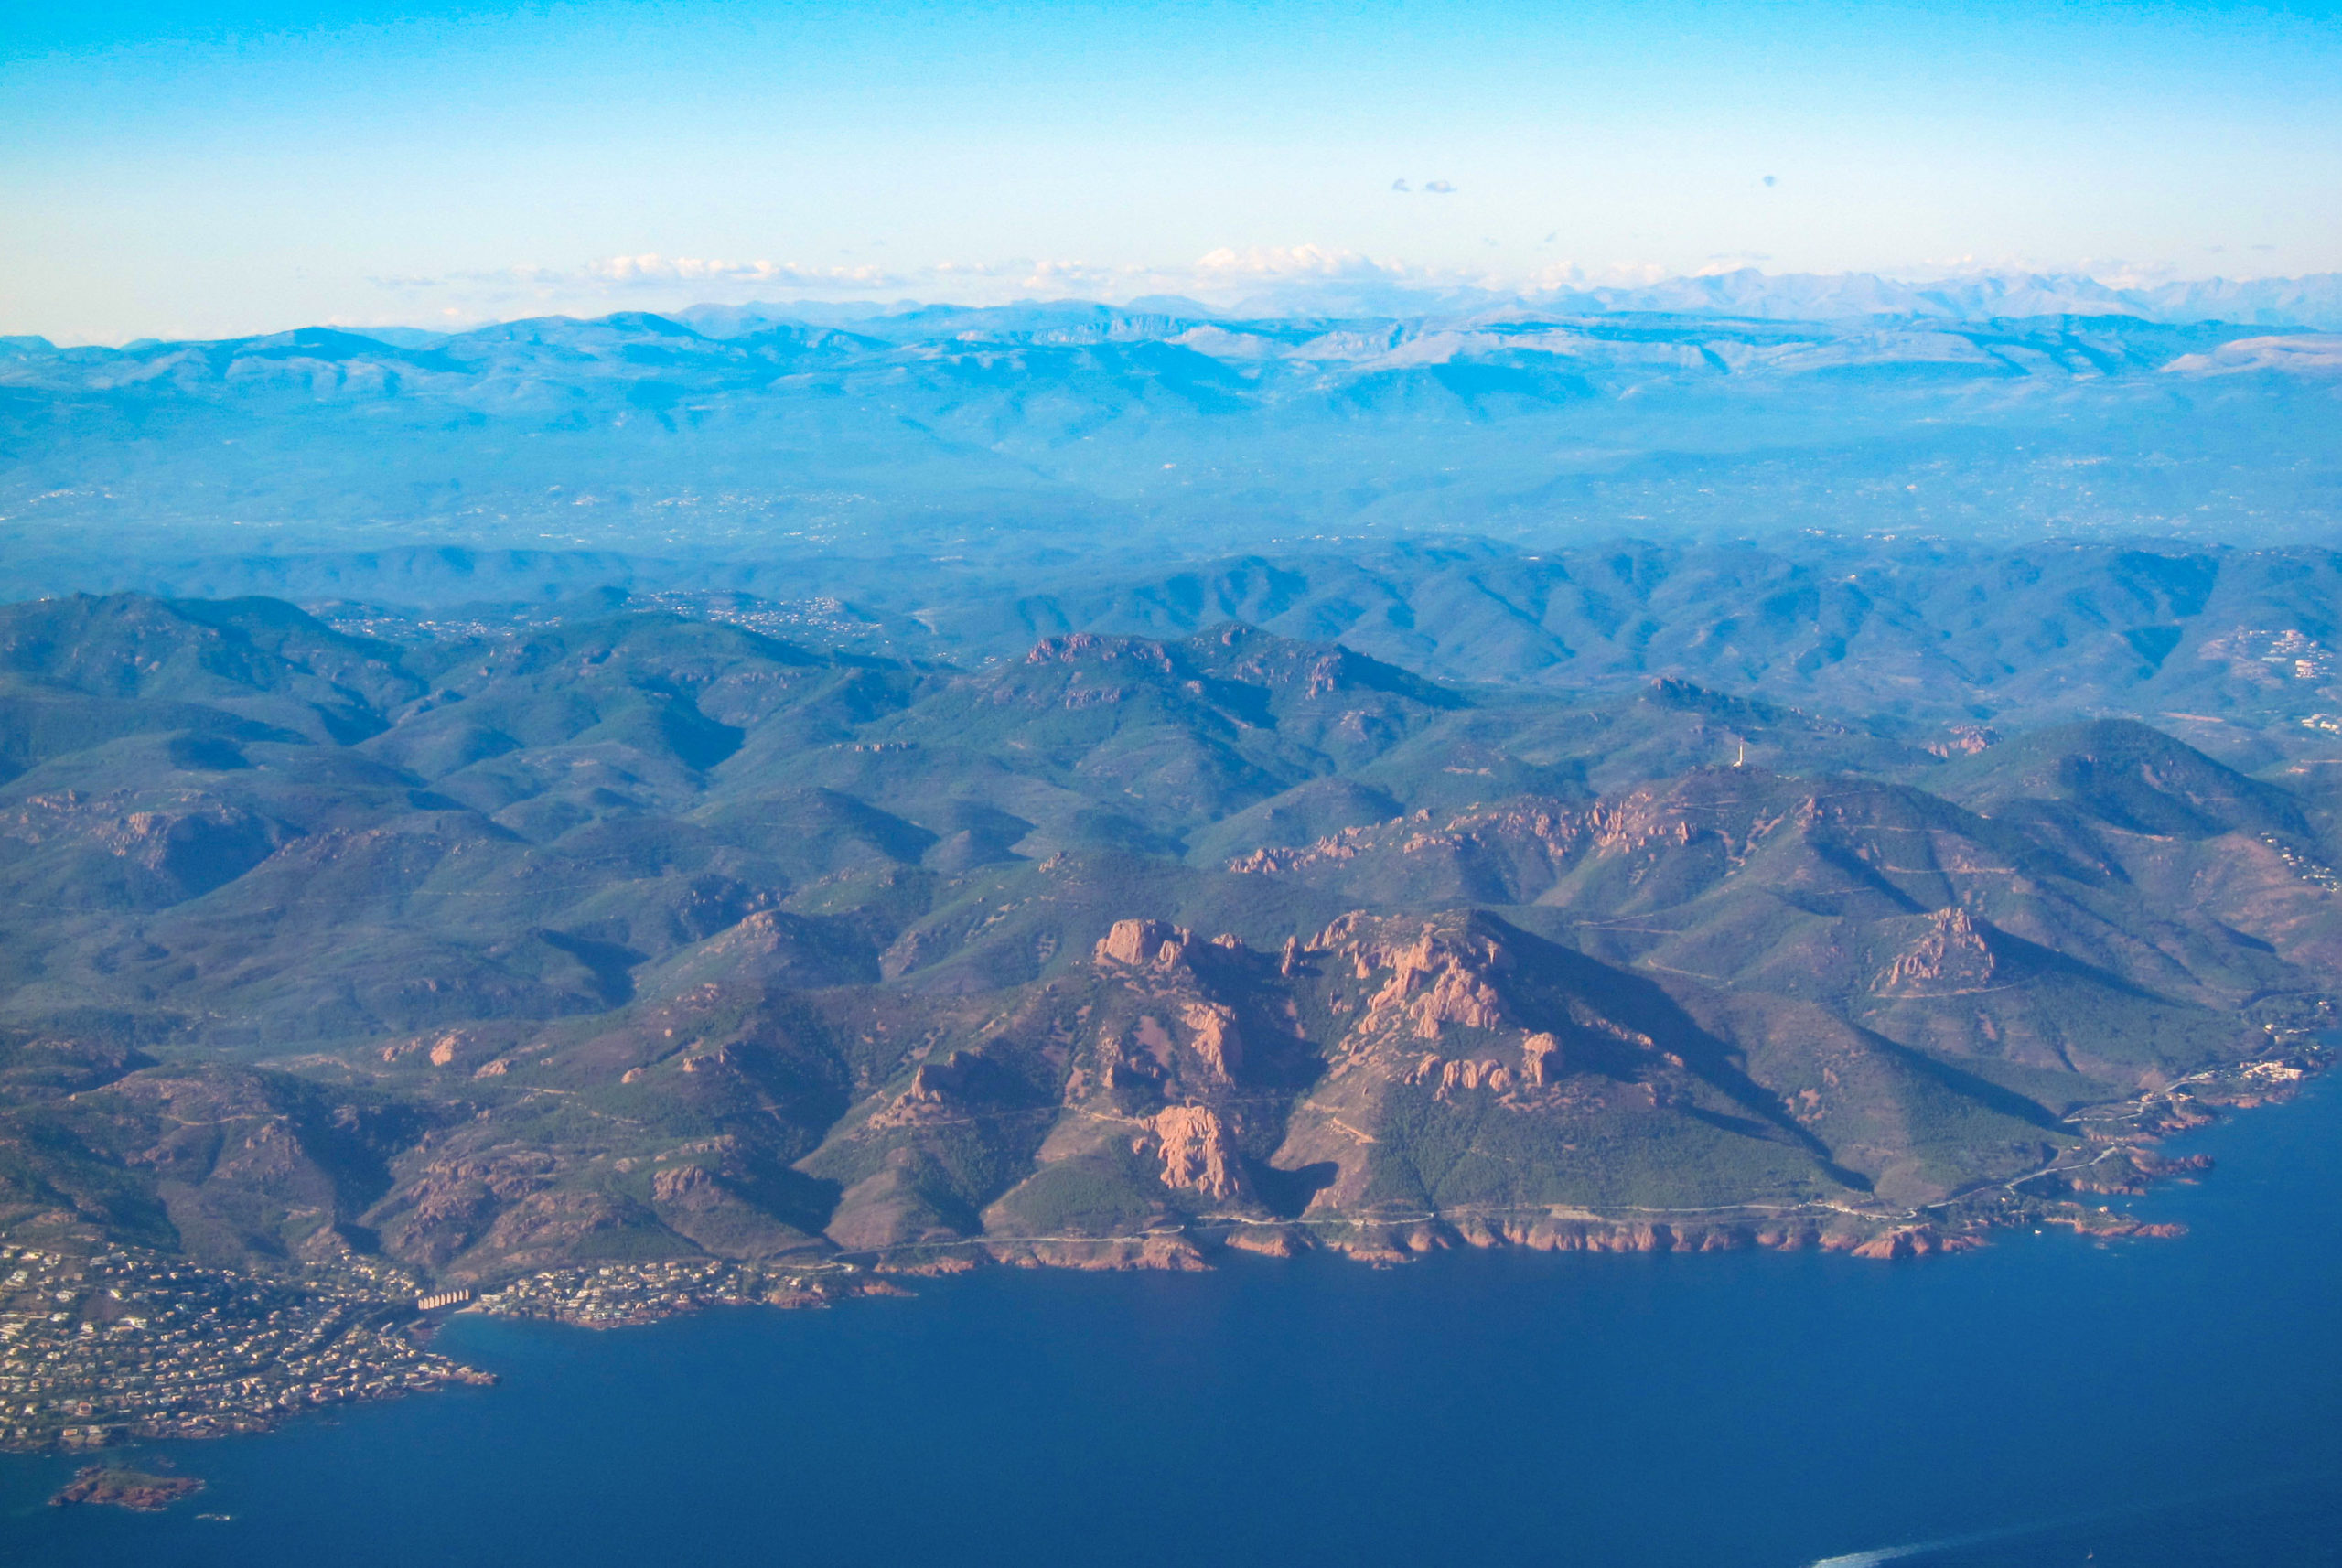 The Esterel corniche road from above © Olivier Cleynen - licence [CC BY-SA 3.0] from Wikimedia Commons